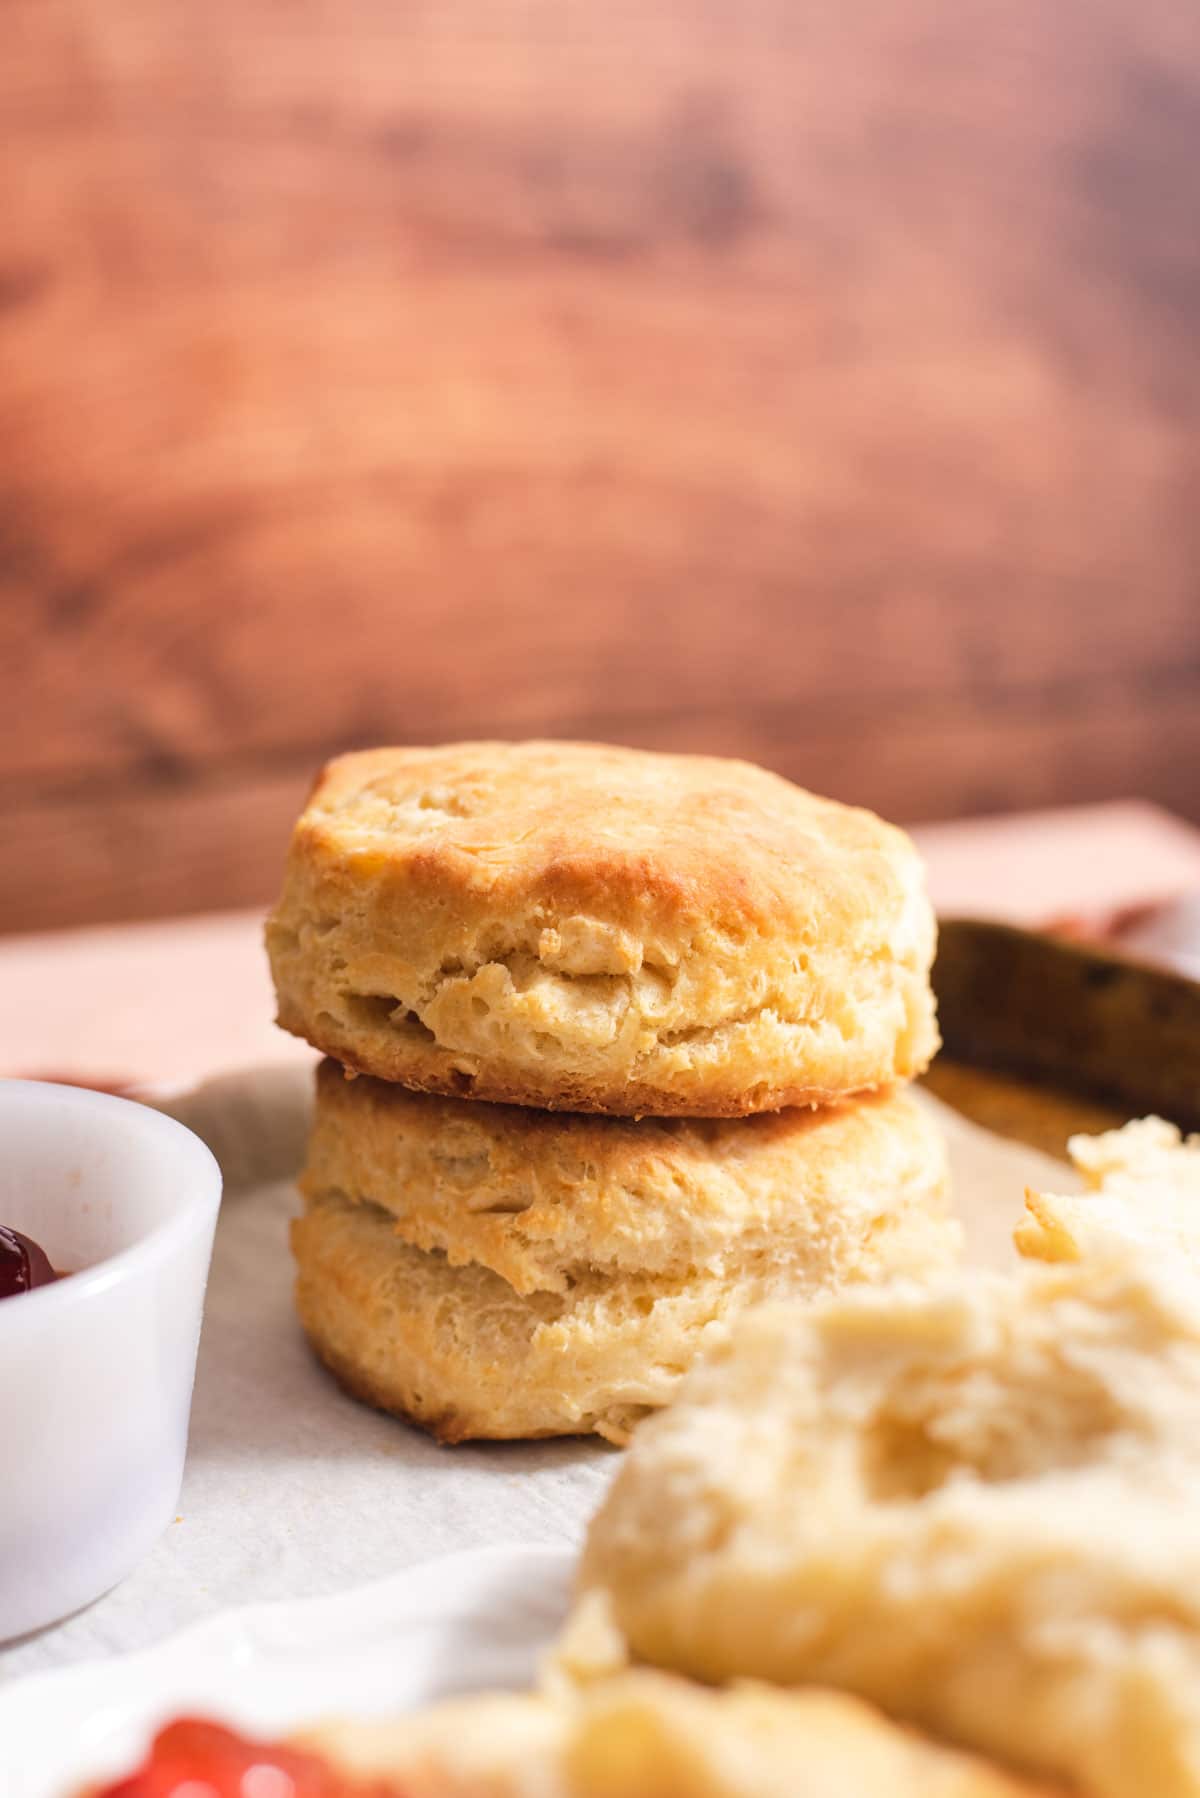 Two biscuits stacked on top of each other with more biscuits in the foreground.